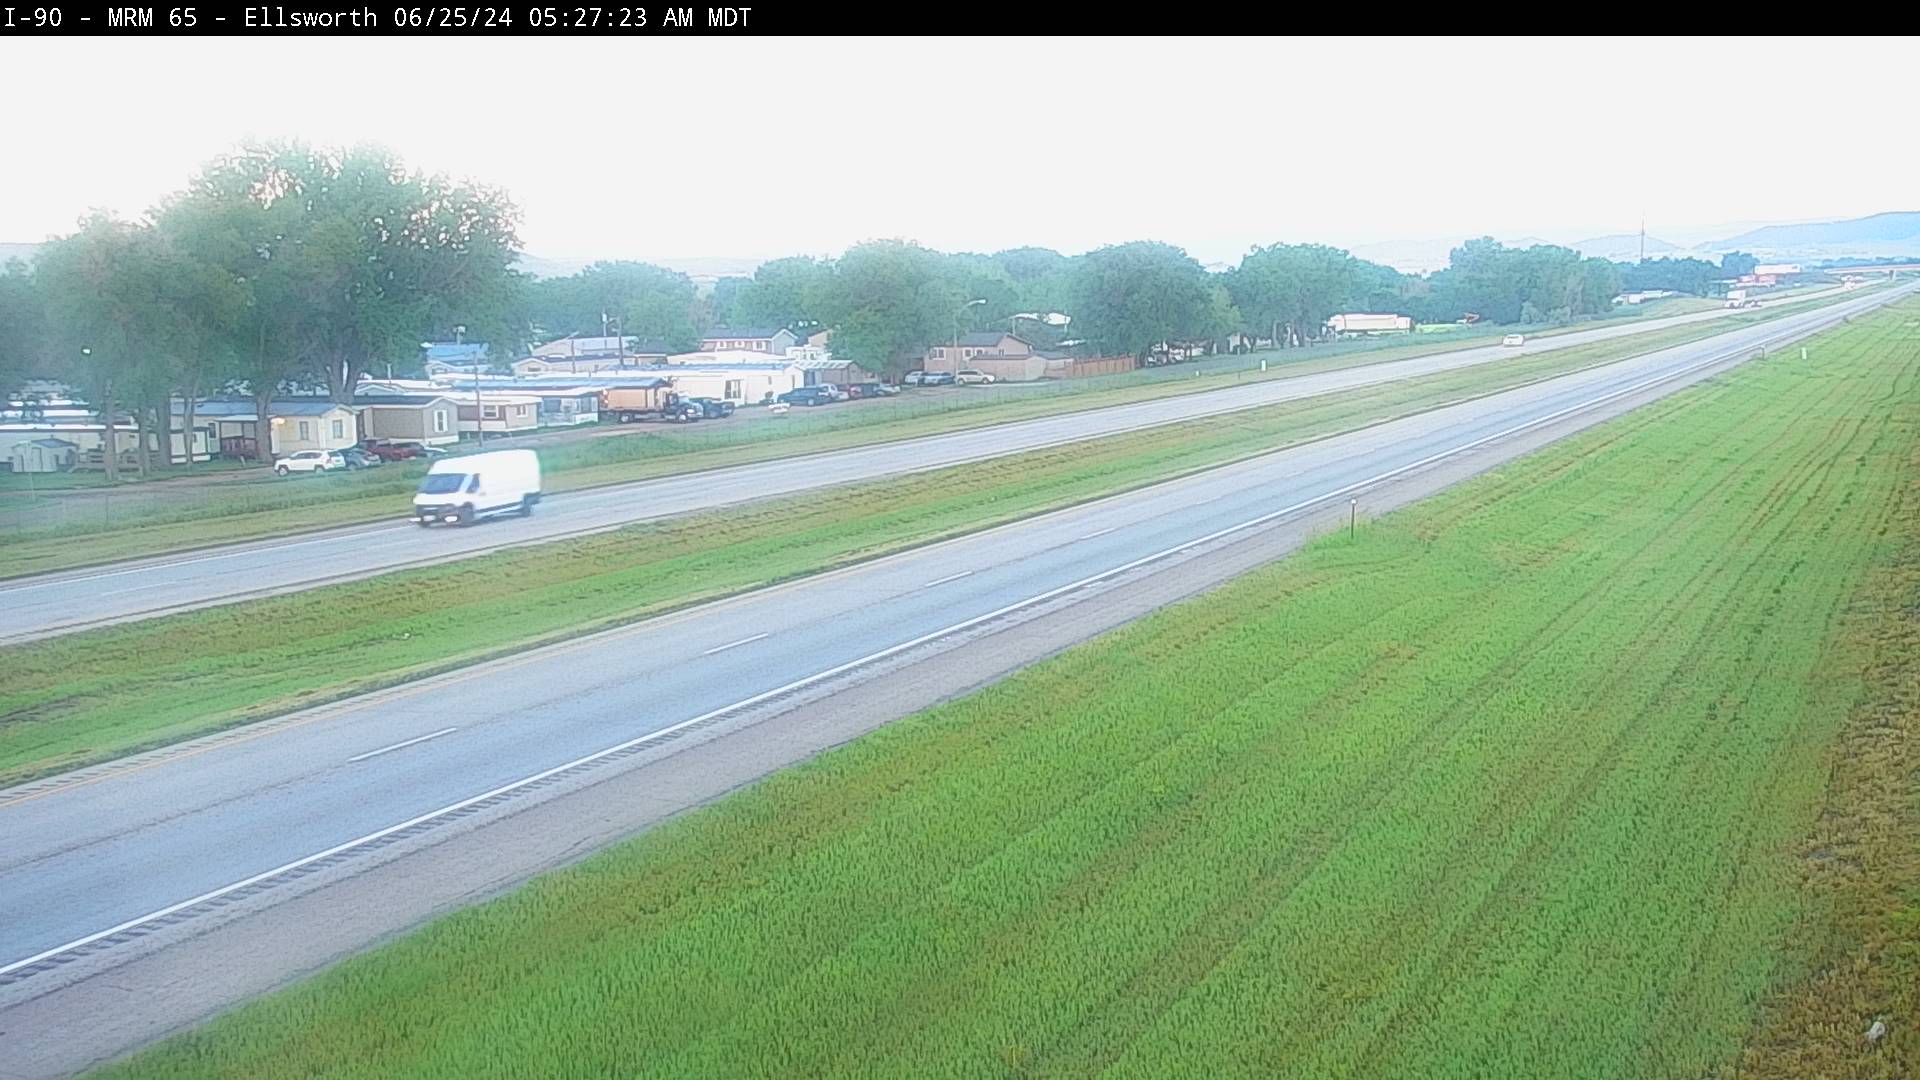 4 miles east of town along I-90 @ MP 65.2 - South Traffic Camera